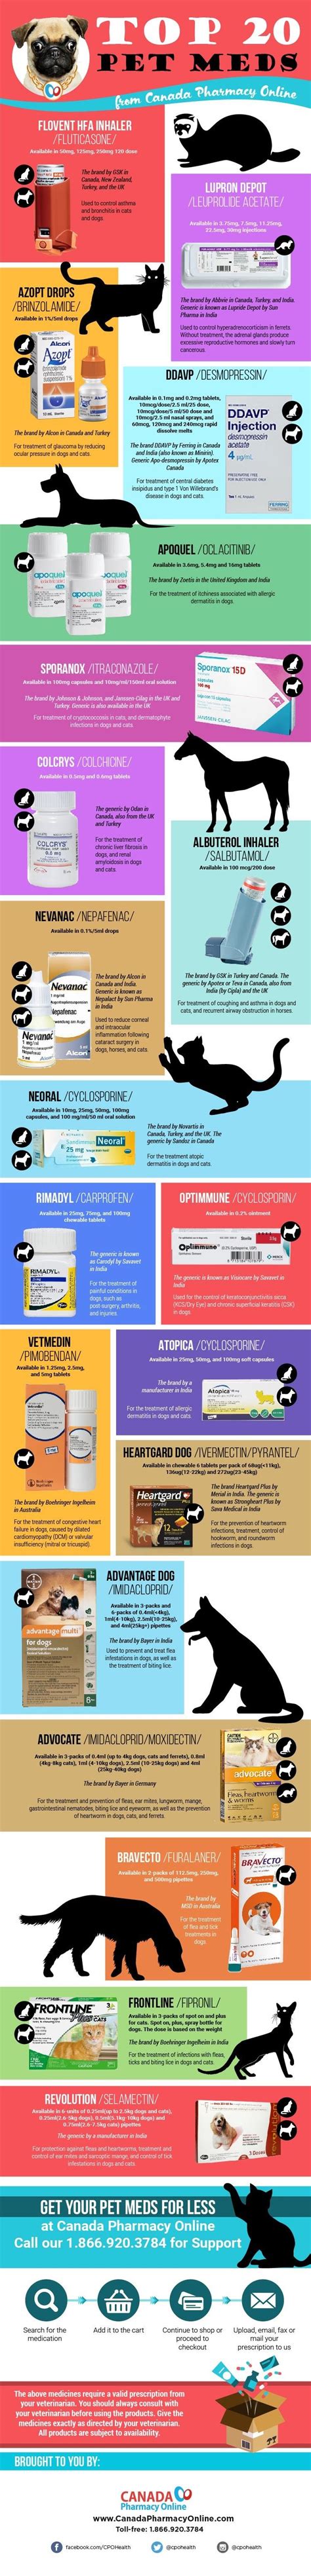 Looking for affordable pet medications? Top 20 Pet Meds from Canada Pharmacy Online #infographic ...